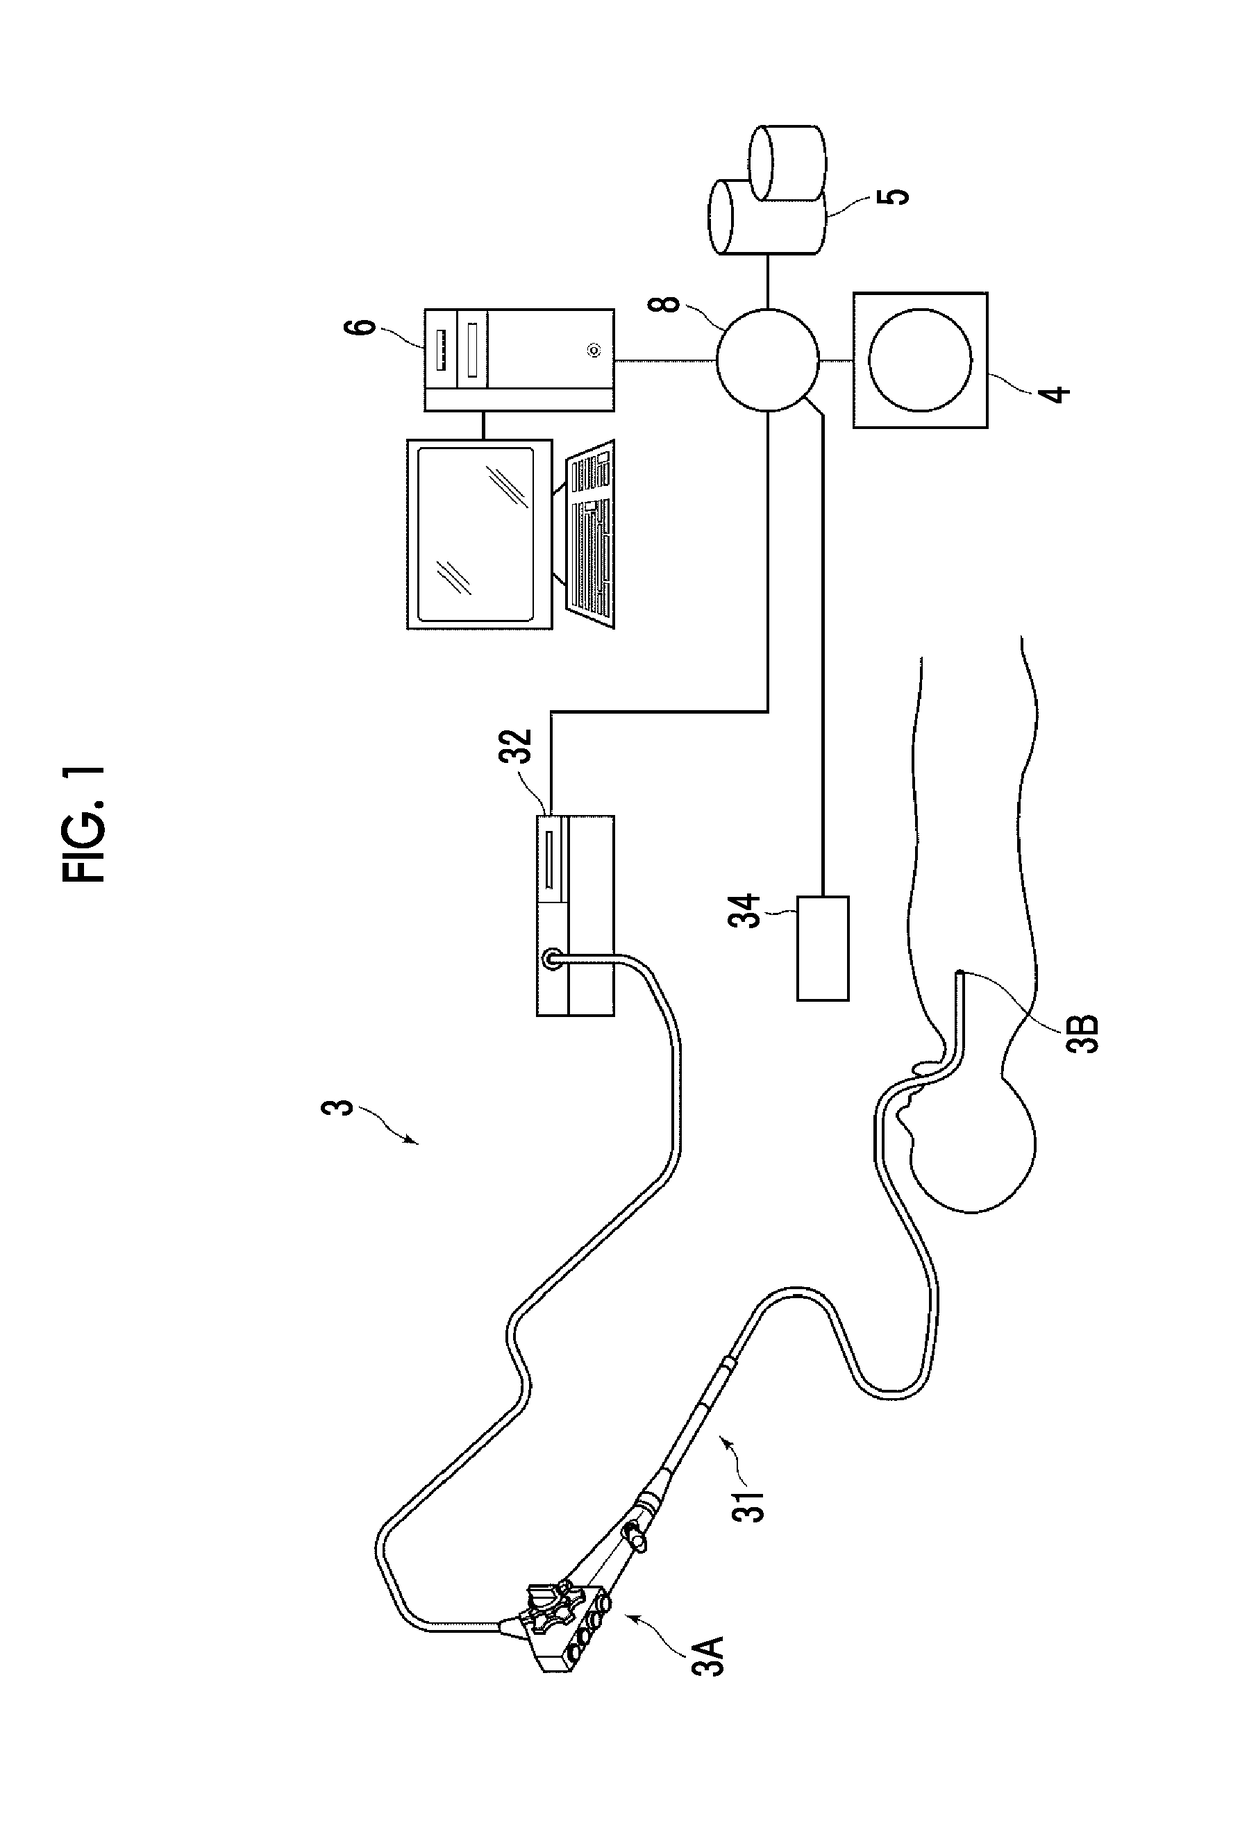 Branching structure determination apparatus, method, and program